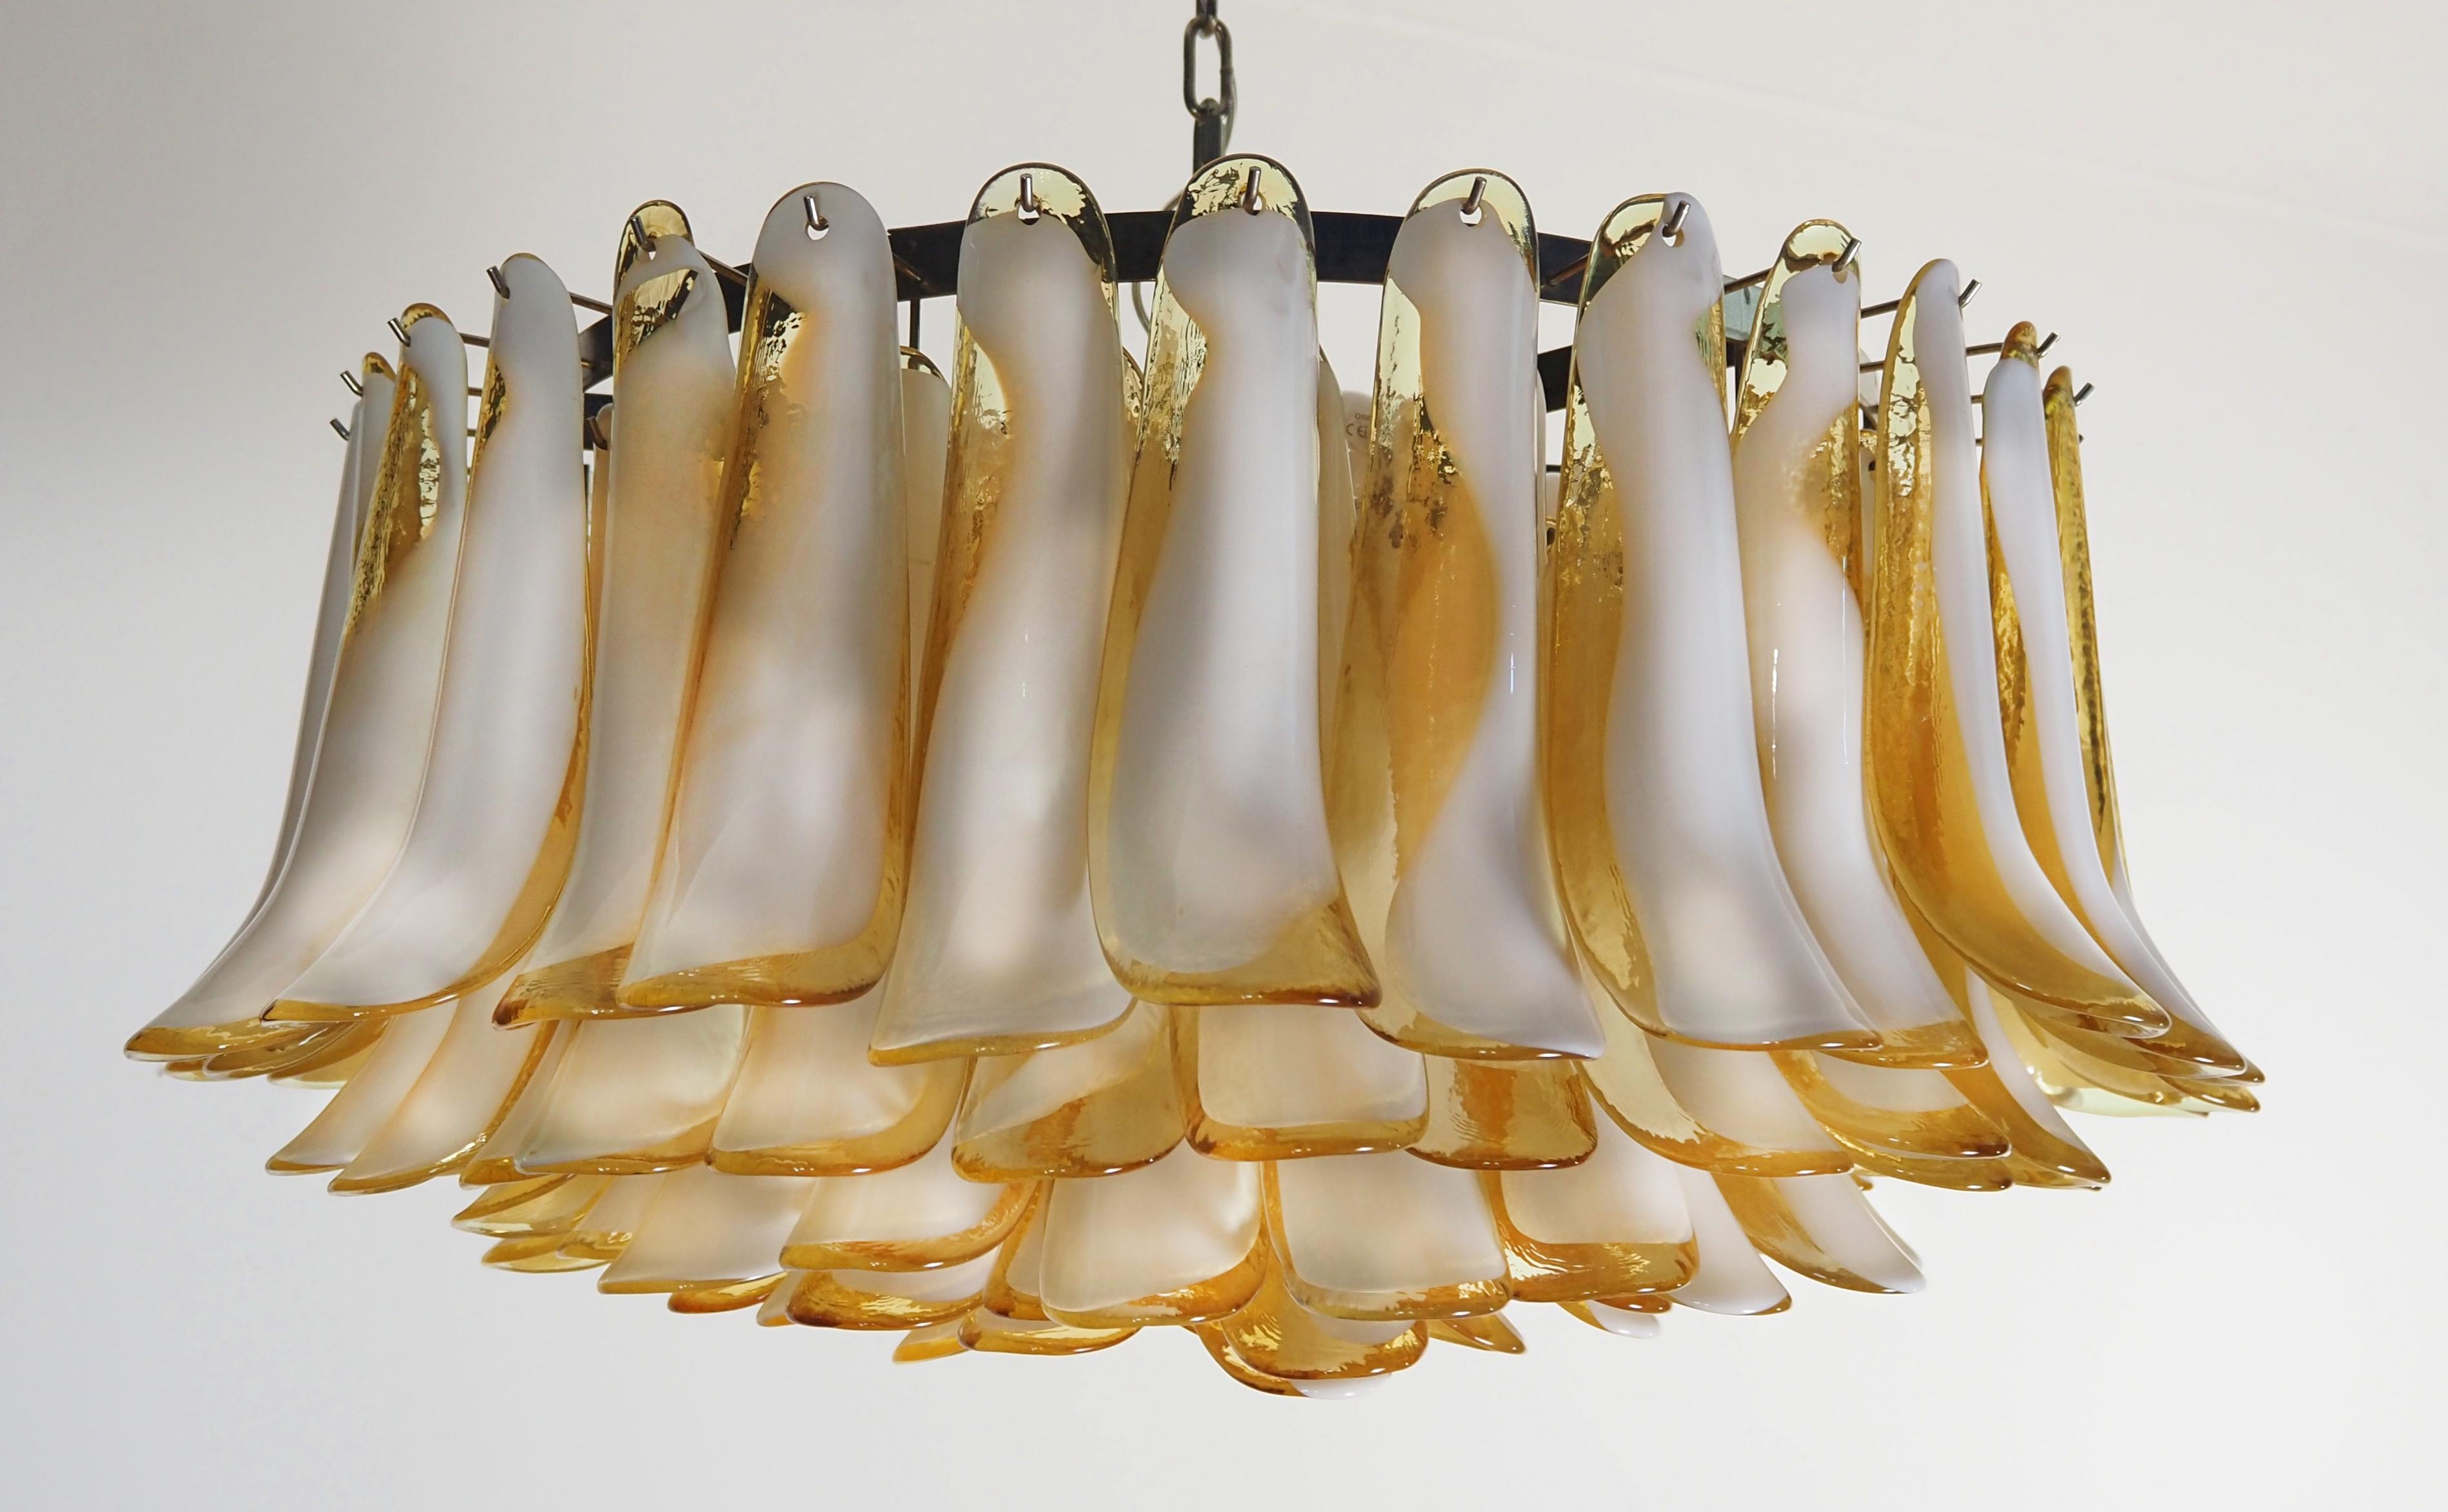 Pair Italian vintage chandeliers in Murano glass and nickel plated metal frame. The armor polished nickel supports 101 glass petals (amber and white “lattimo”) that give a very elegant look. Can be used as a chandelier with chain, or as a ceiling